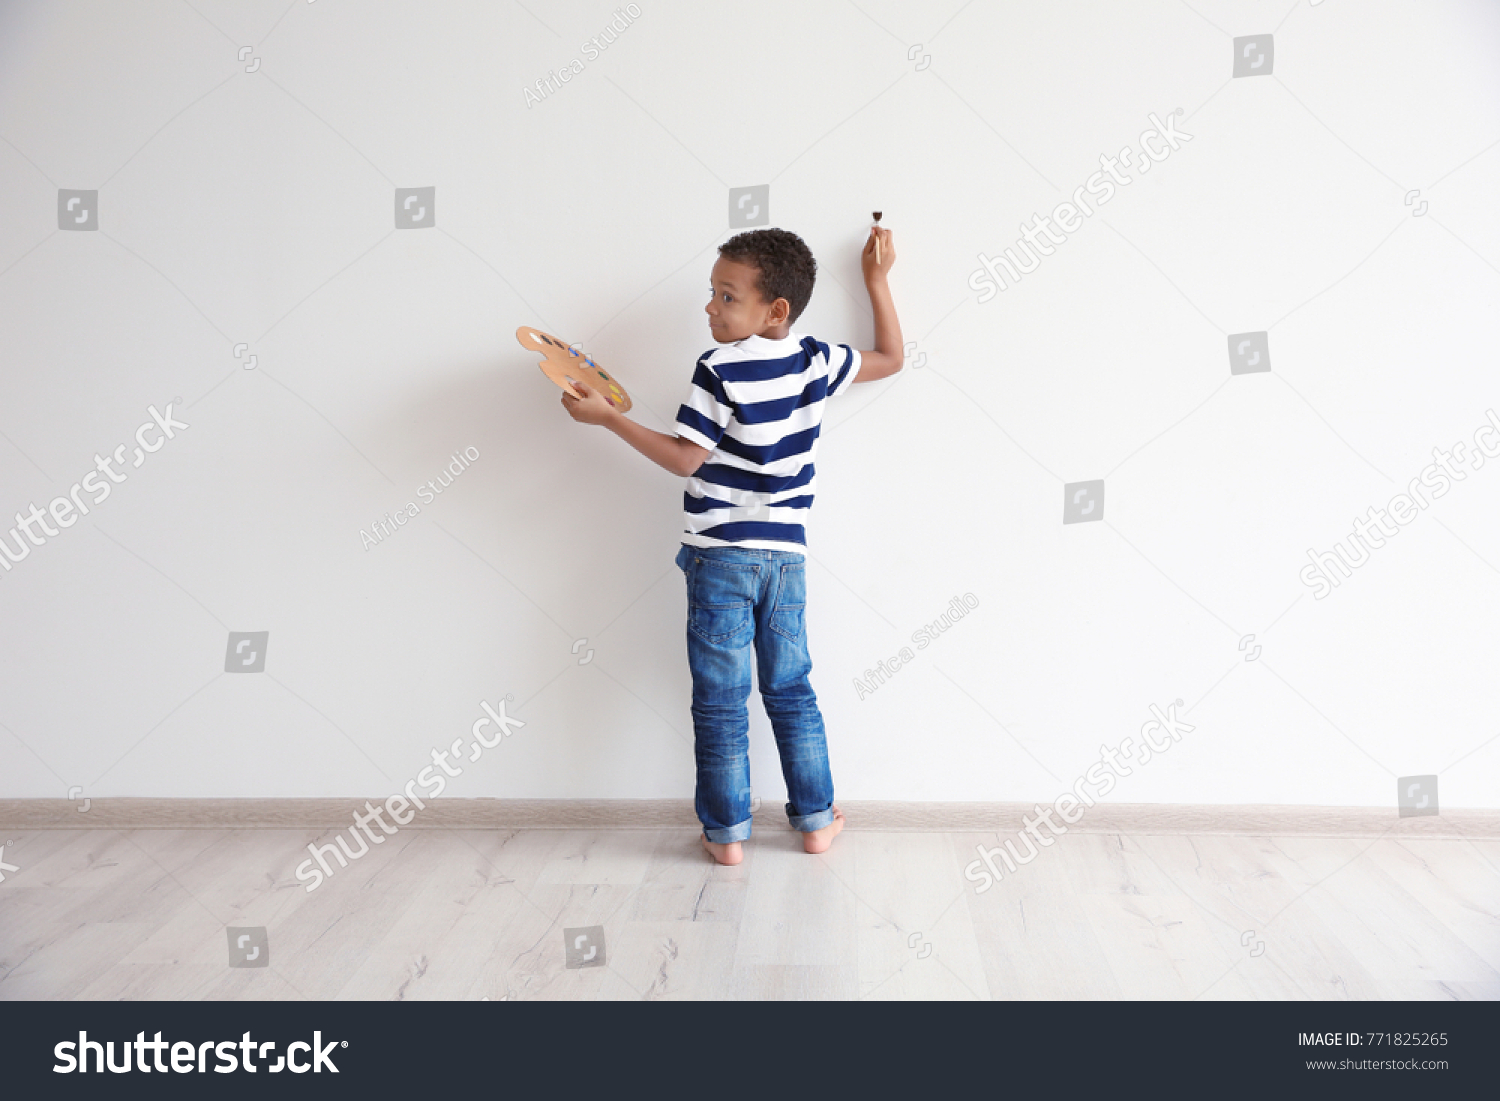 Little African-American boy painting on wall indoors #771825265